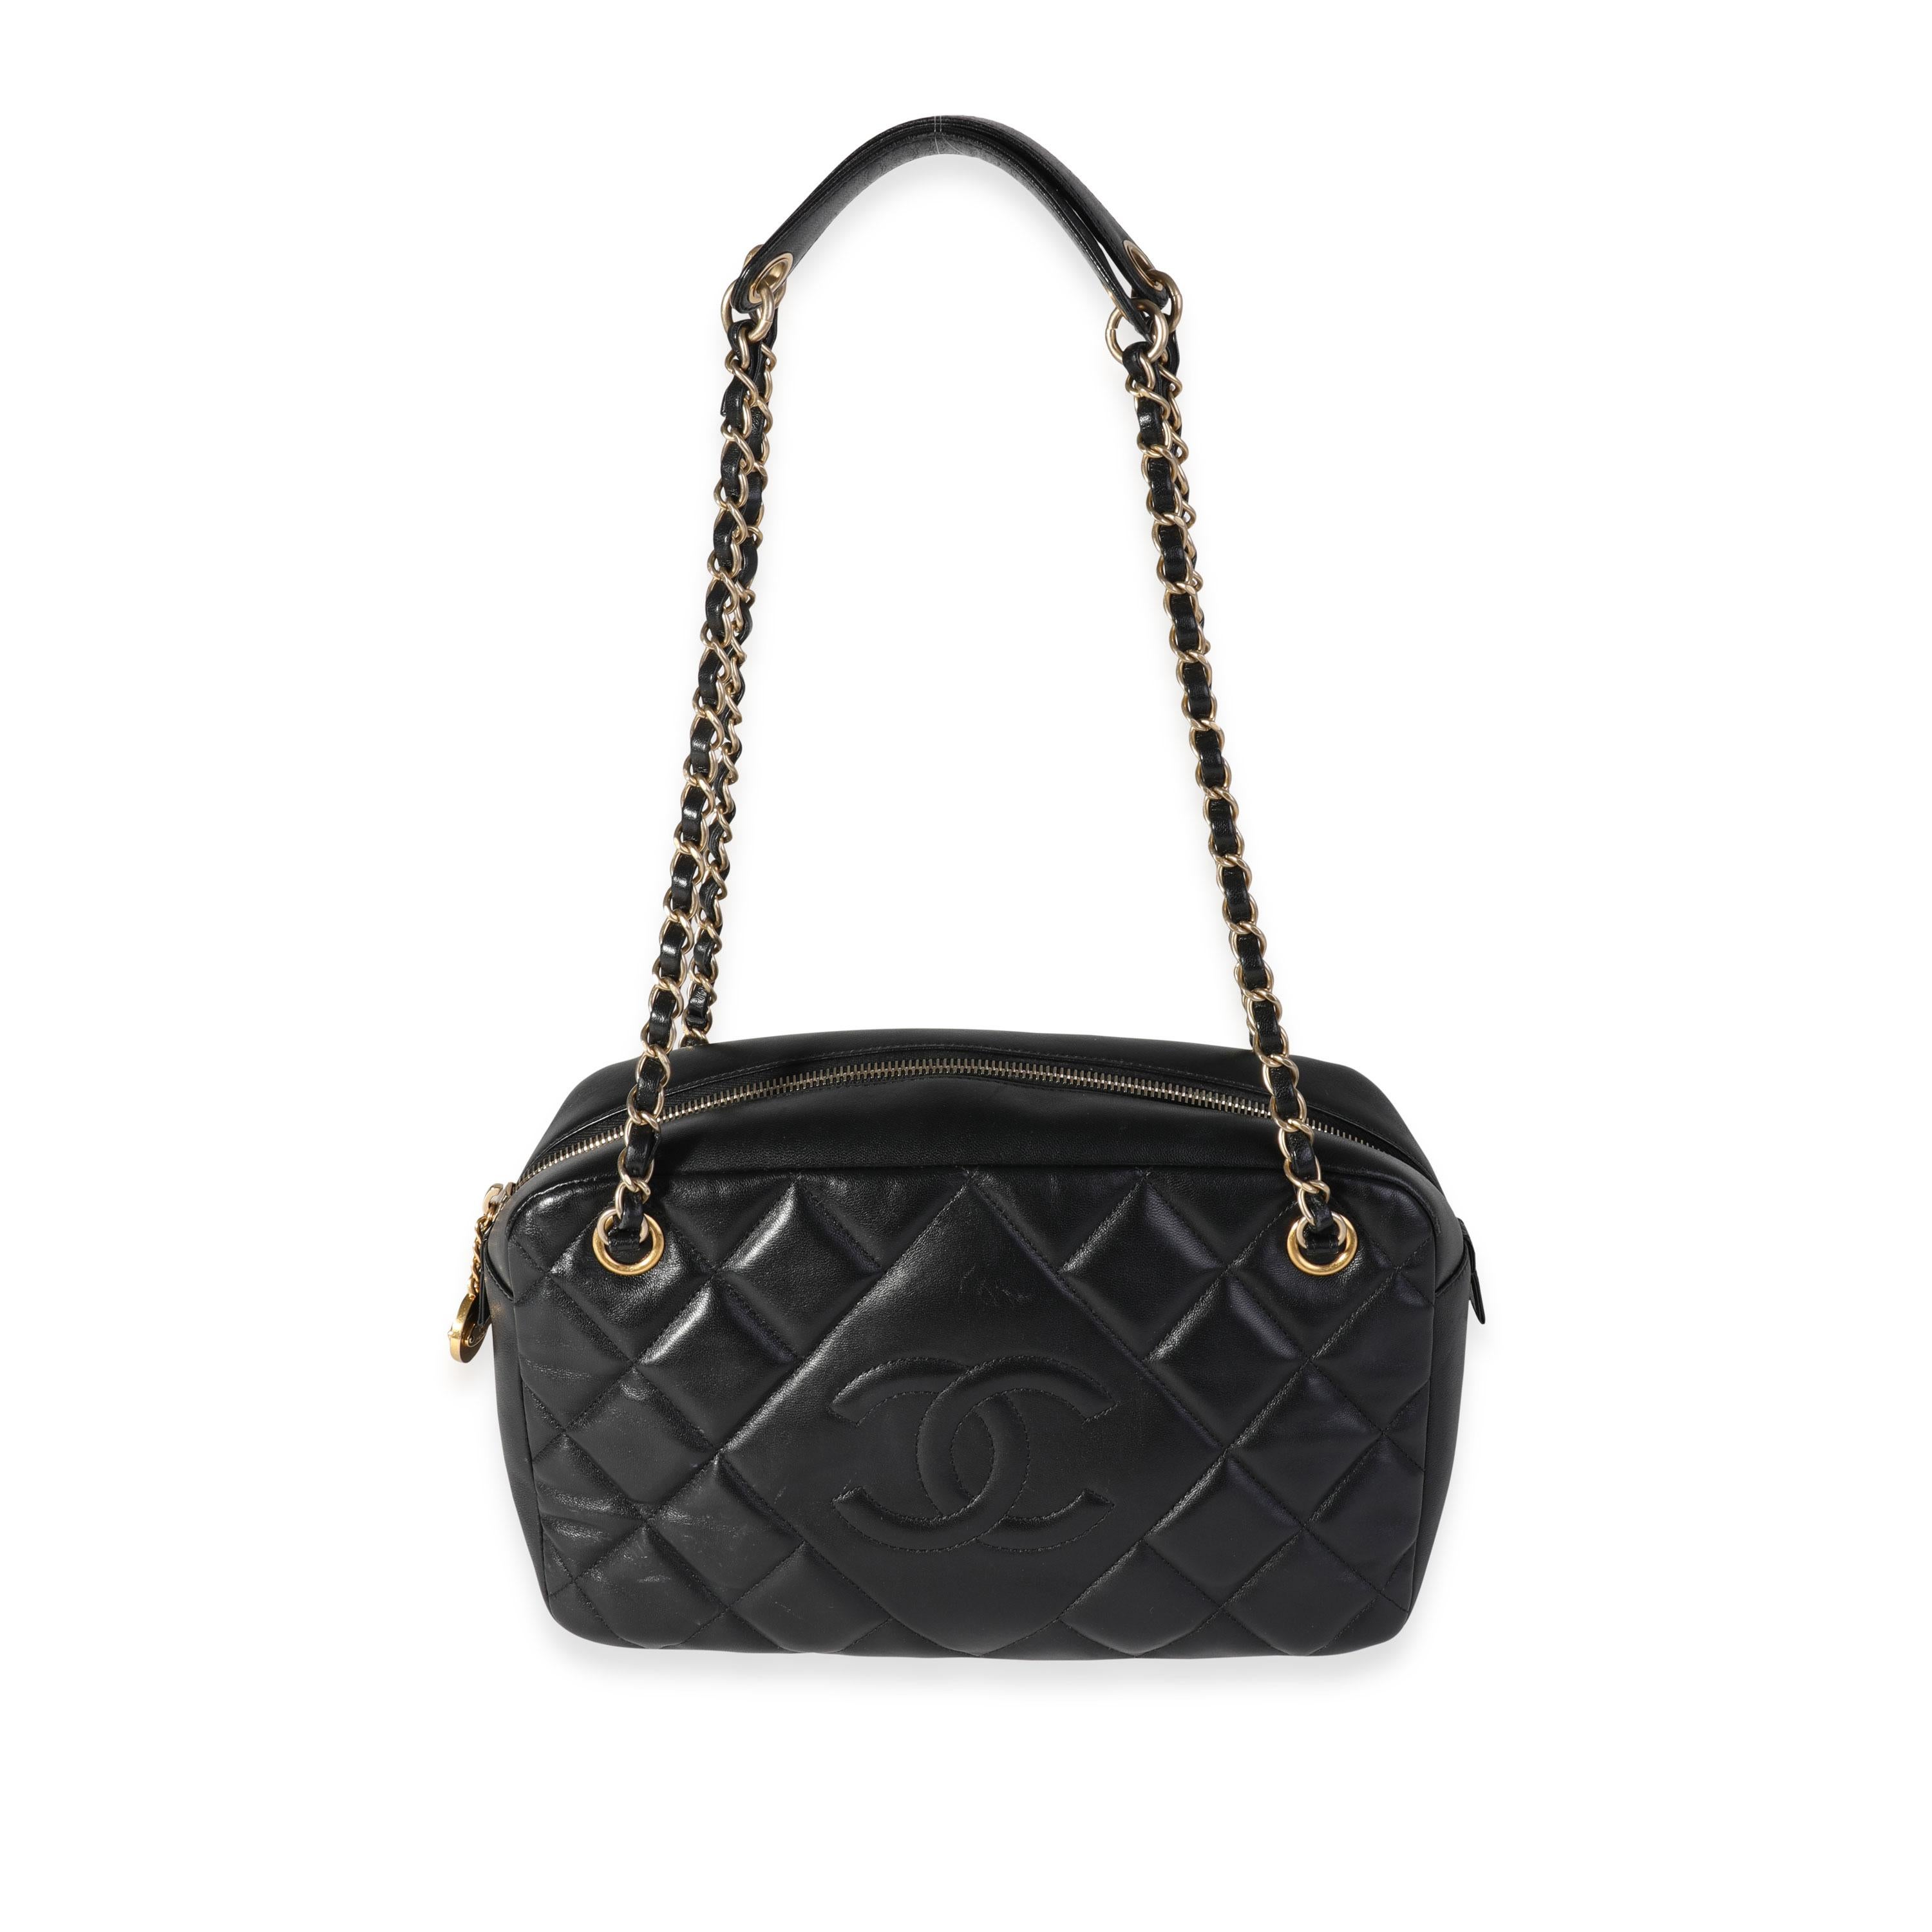 Listing Title: Chanel Black Quilted Lambskin Diamond Camera Bag
SKU: 119483
Condition: Pre-owned (3000)
Handbag Condition: Very Good
Condition Comments: Minor scuffs at exterior top and bottom corners. Light throughout exterior surface.
Brand: